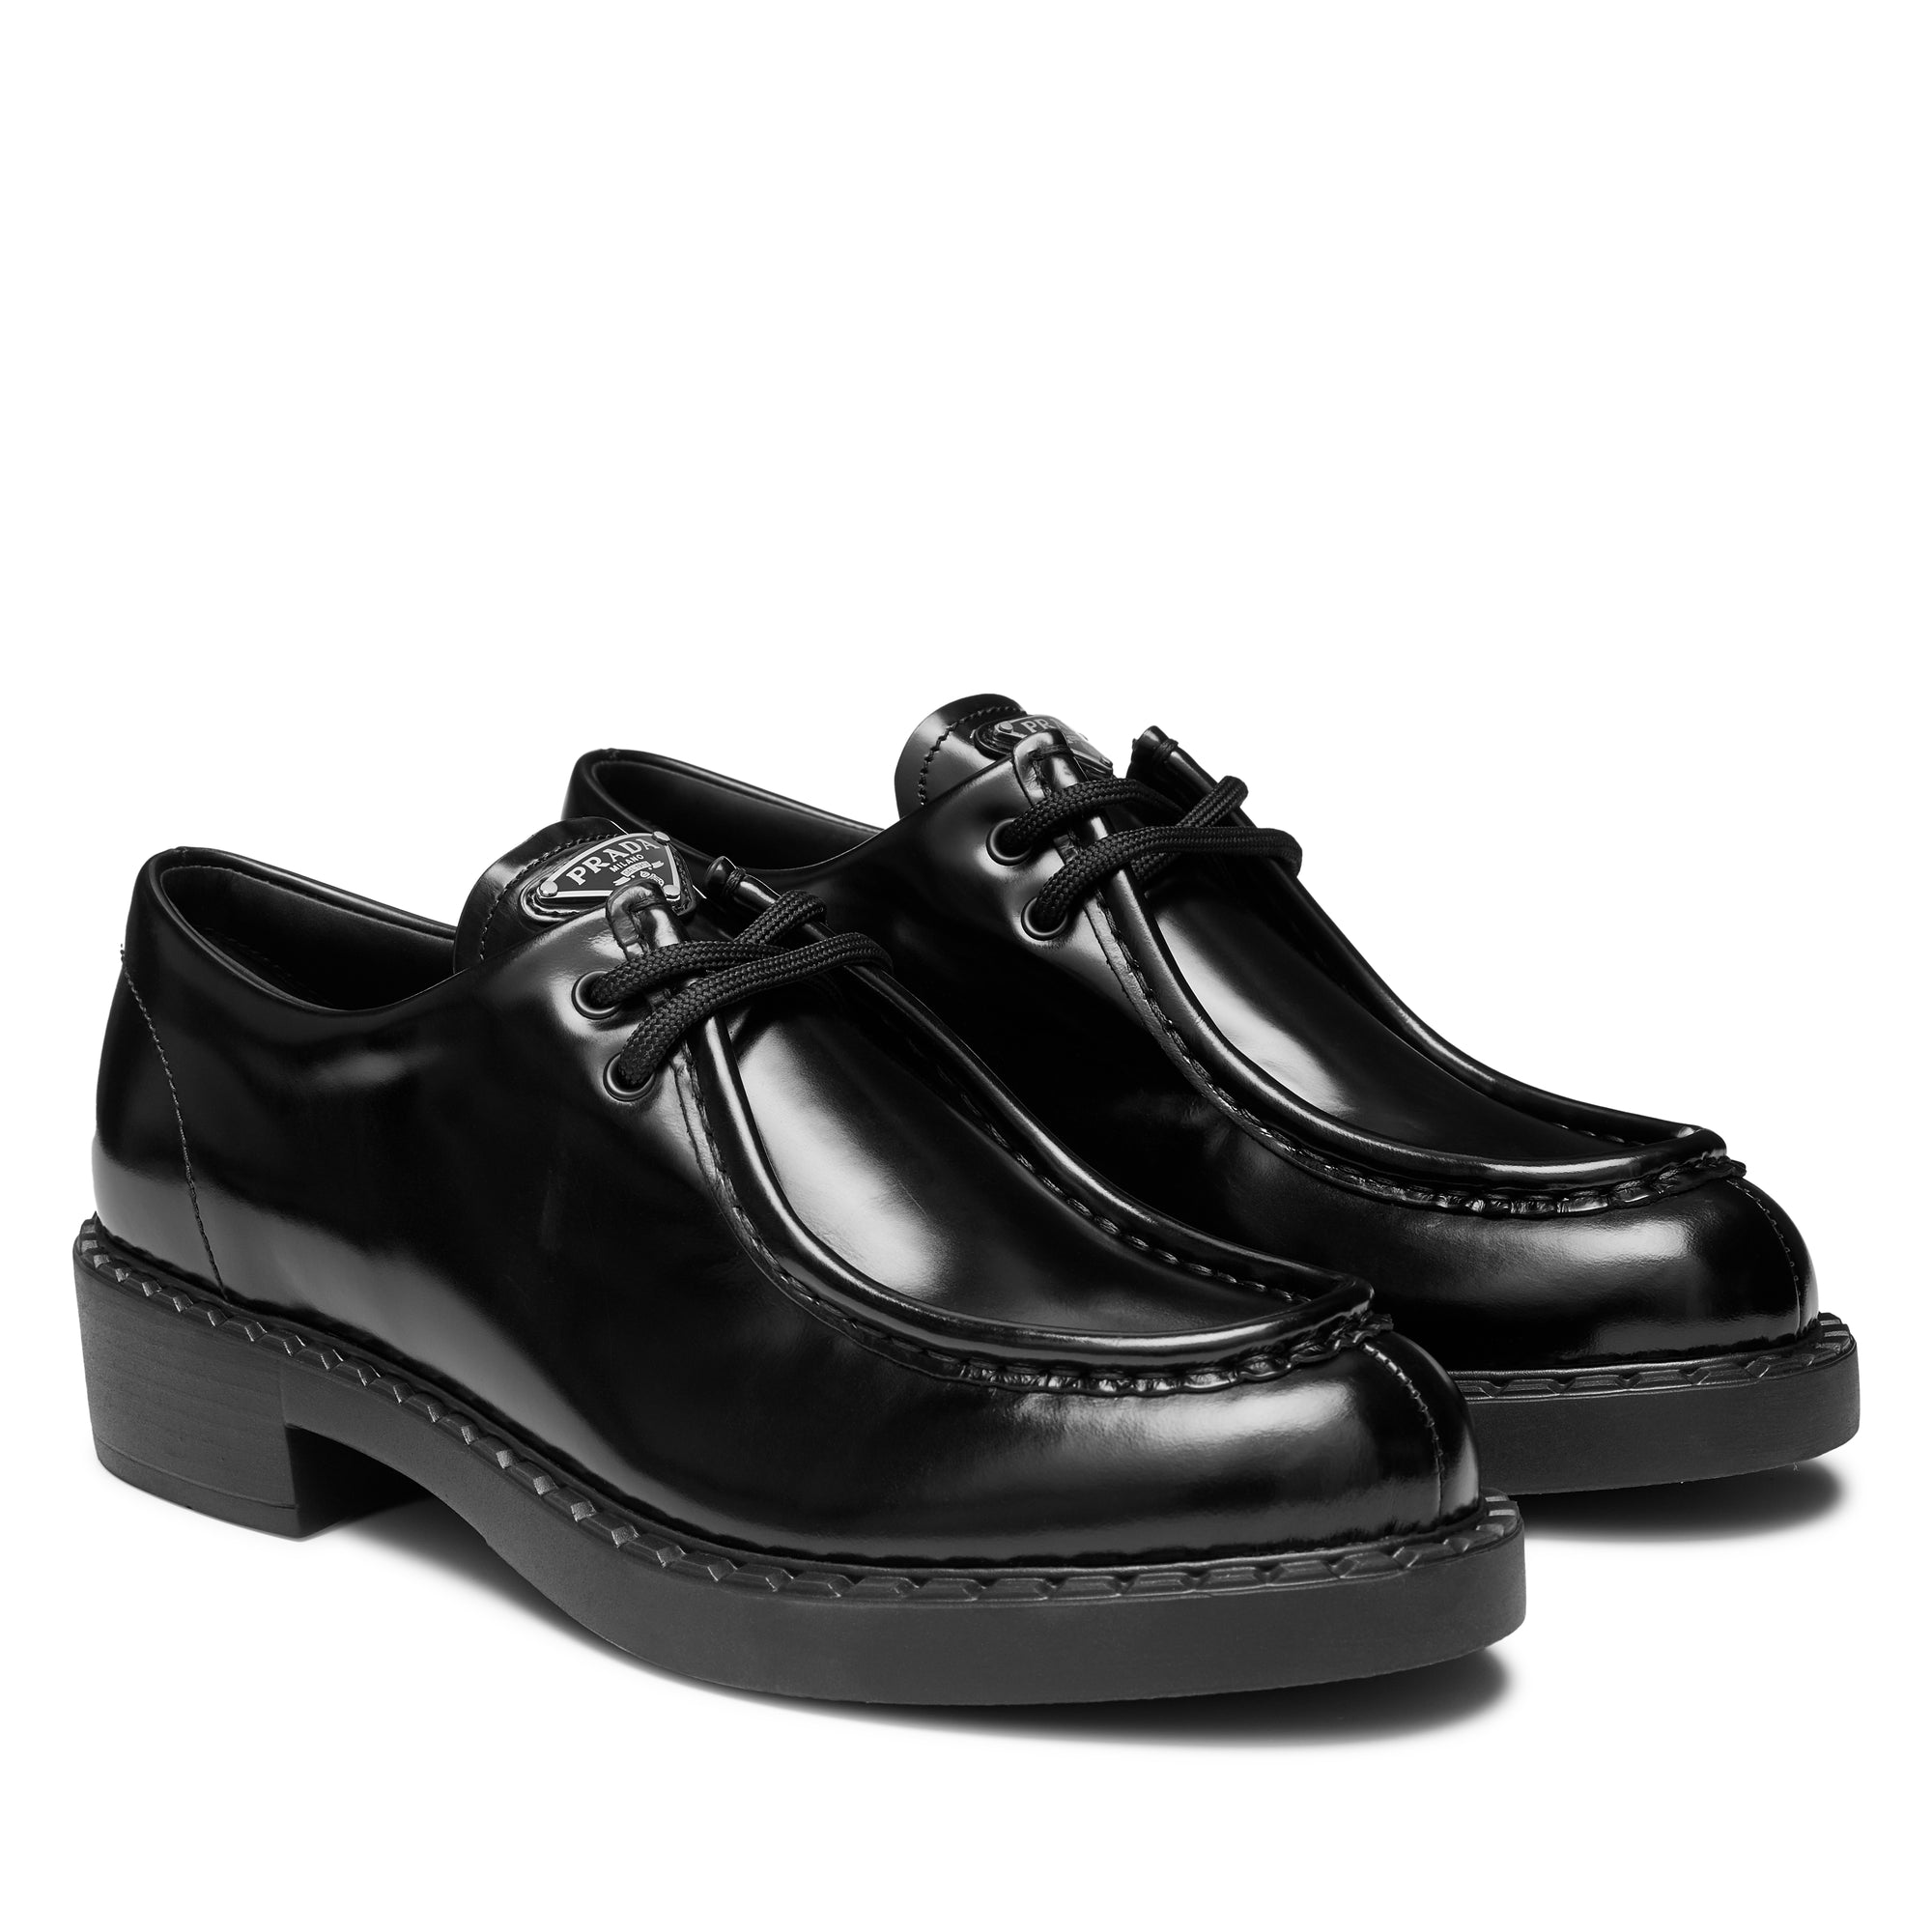 Prada - Women's Brushed Leather Lace-Up Shoes - (Nero) view 4